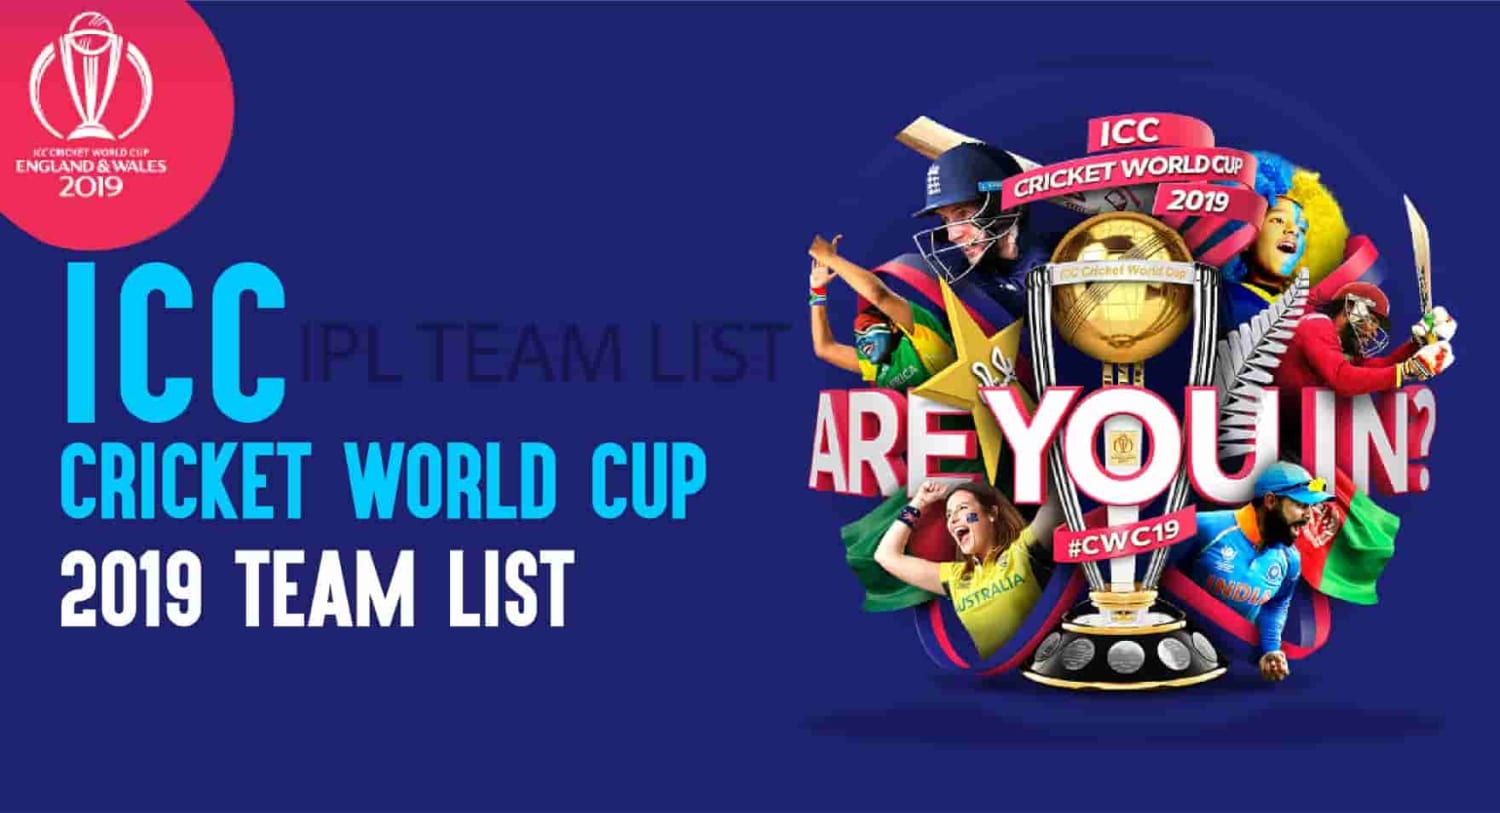 ICC Cricket World Cup 2019 Team List Complete List Here